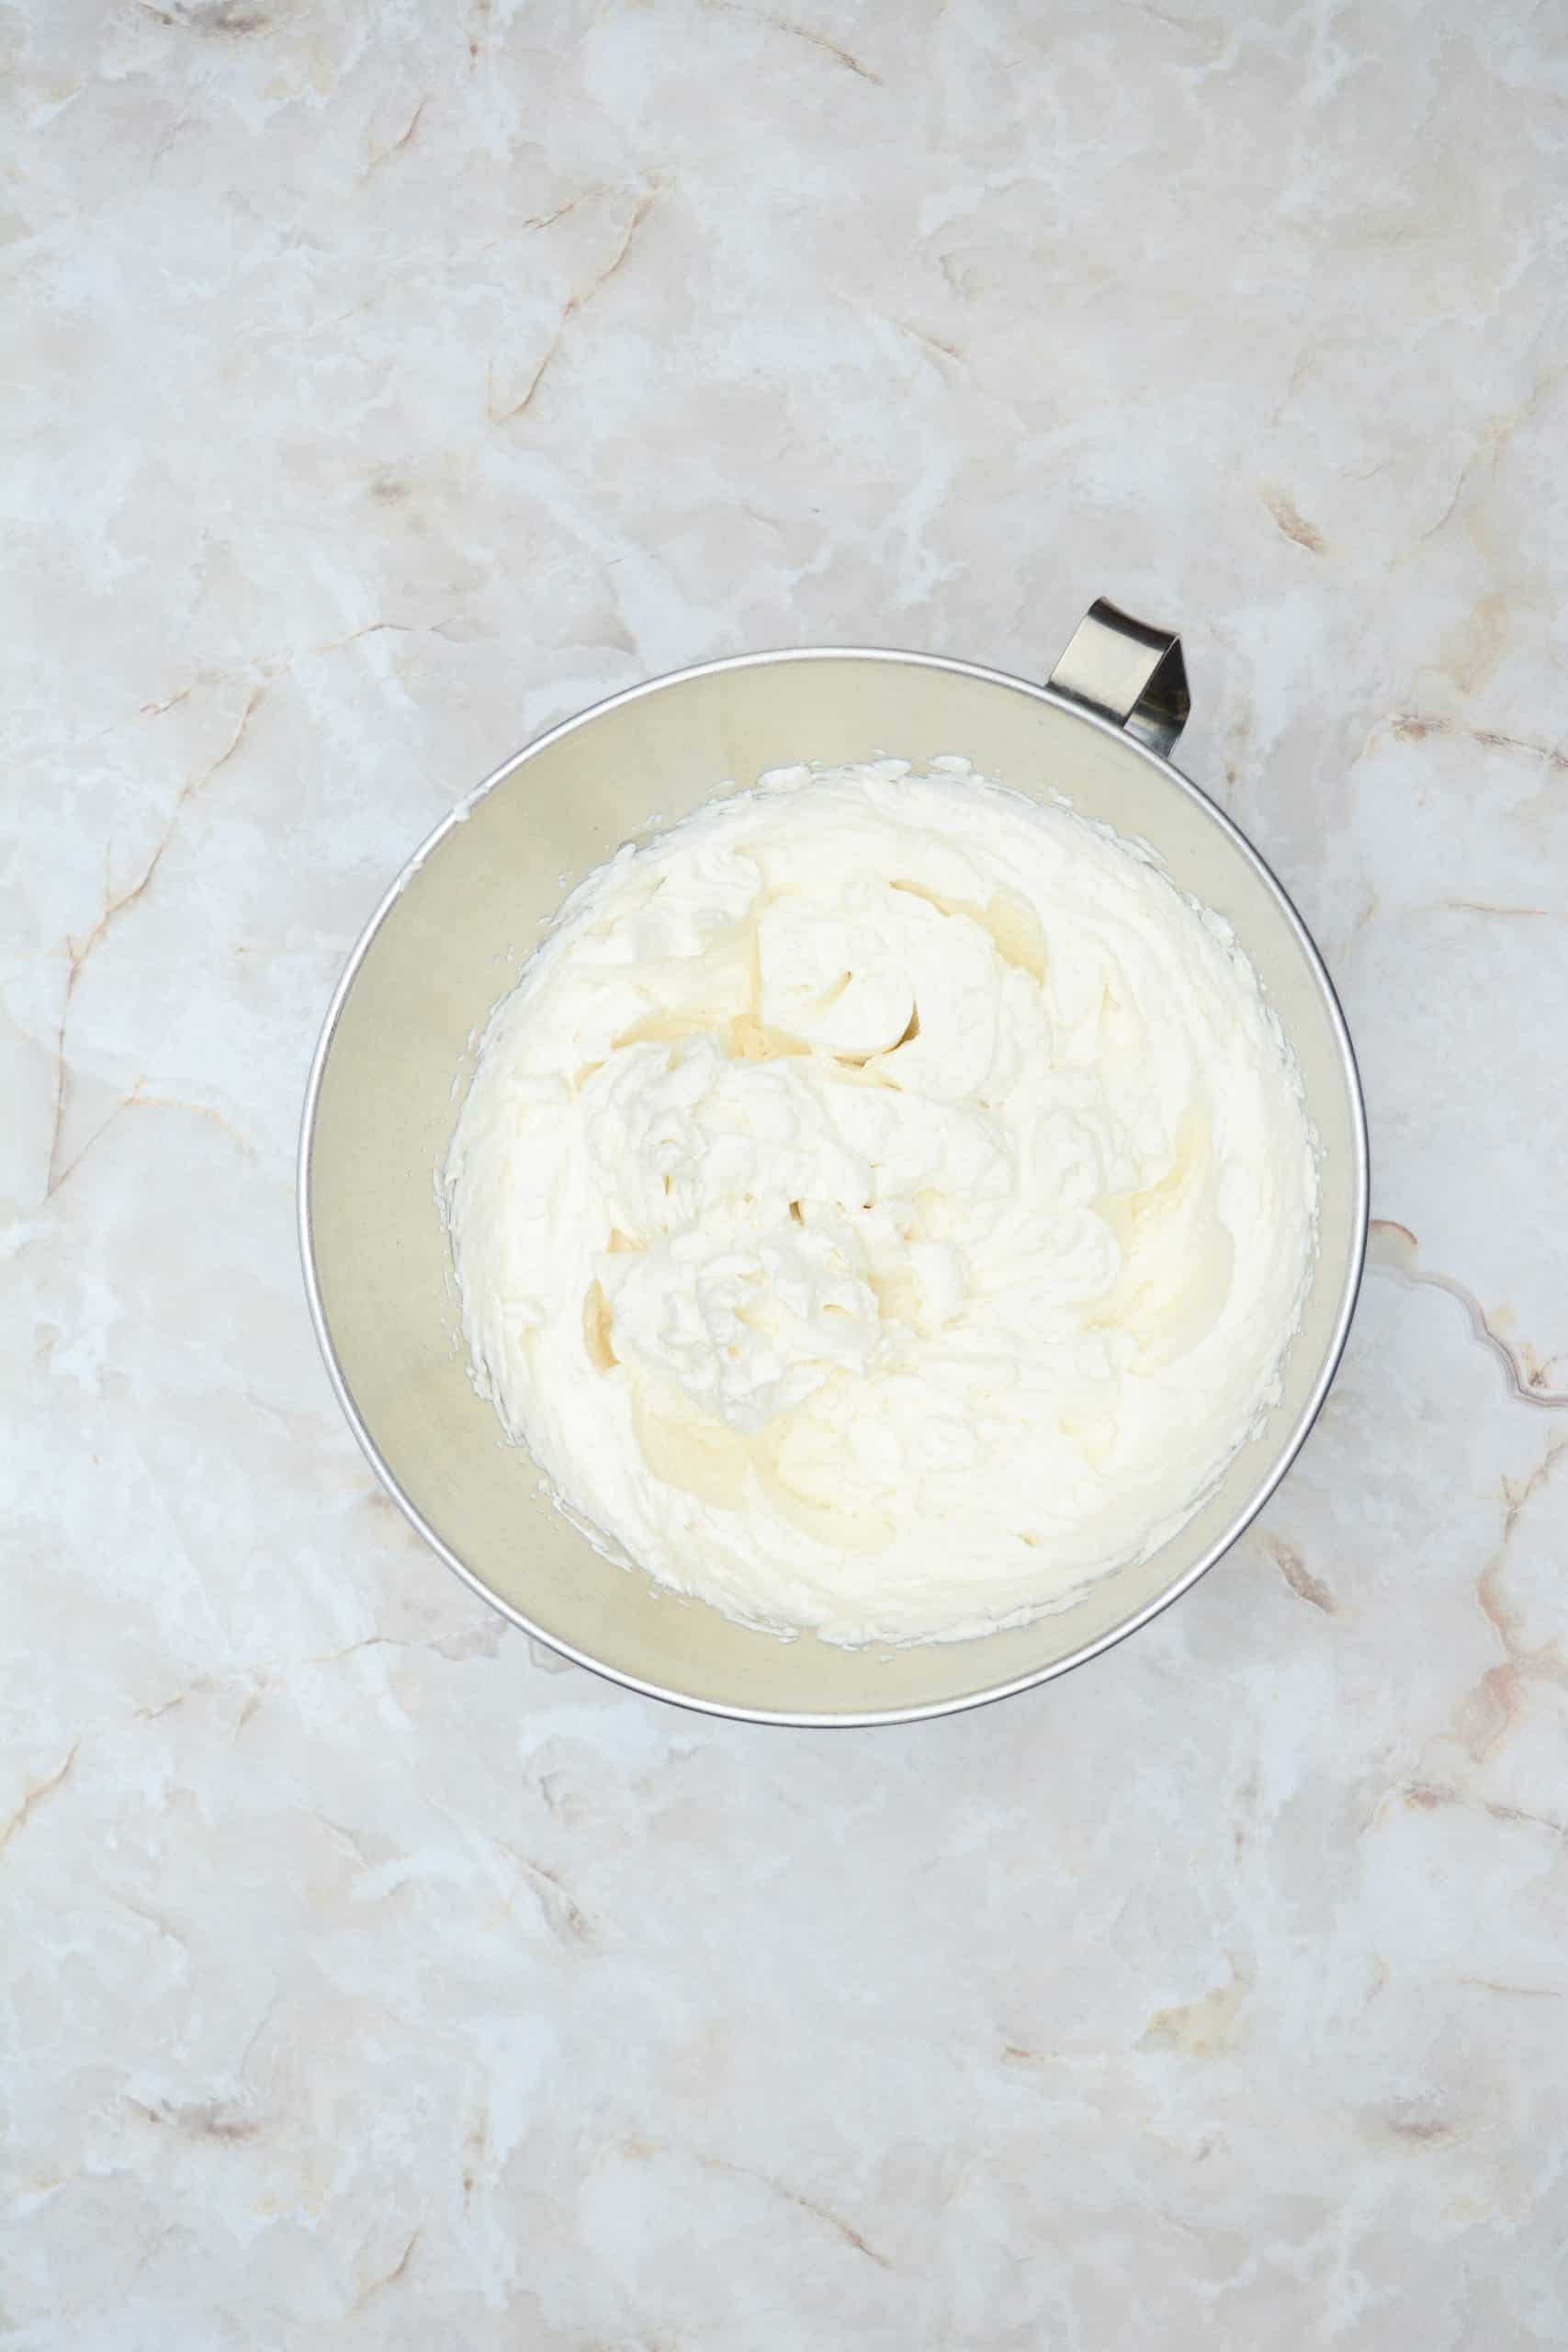 stabilized whipped cream frosting with gelatin in a metal mixing bowl